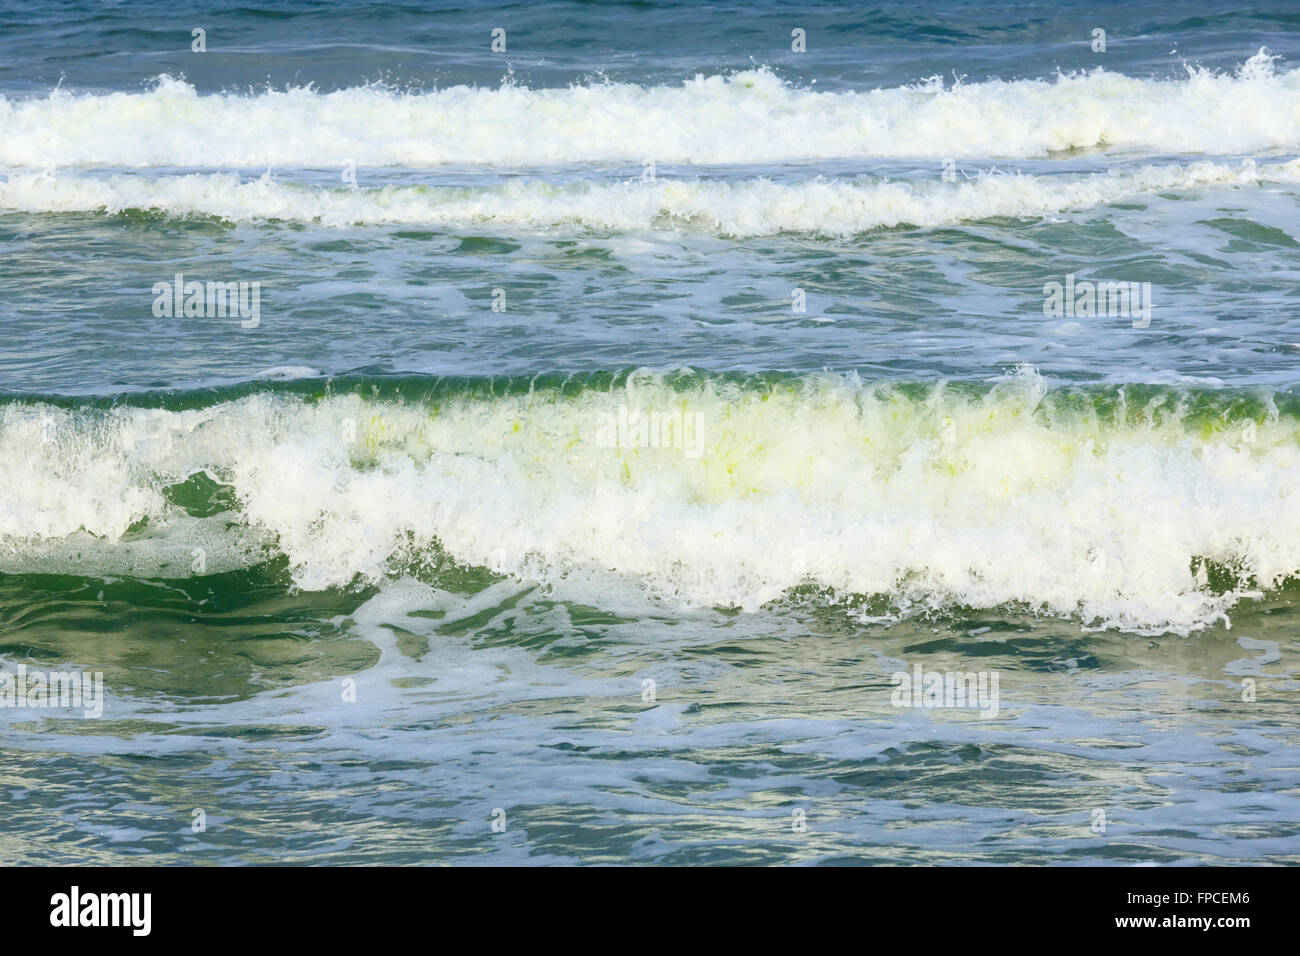 Sea surf waves with foam caps. Nature background. Stock Photo